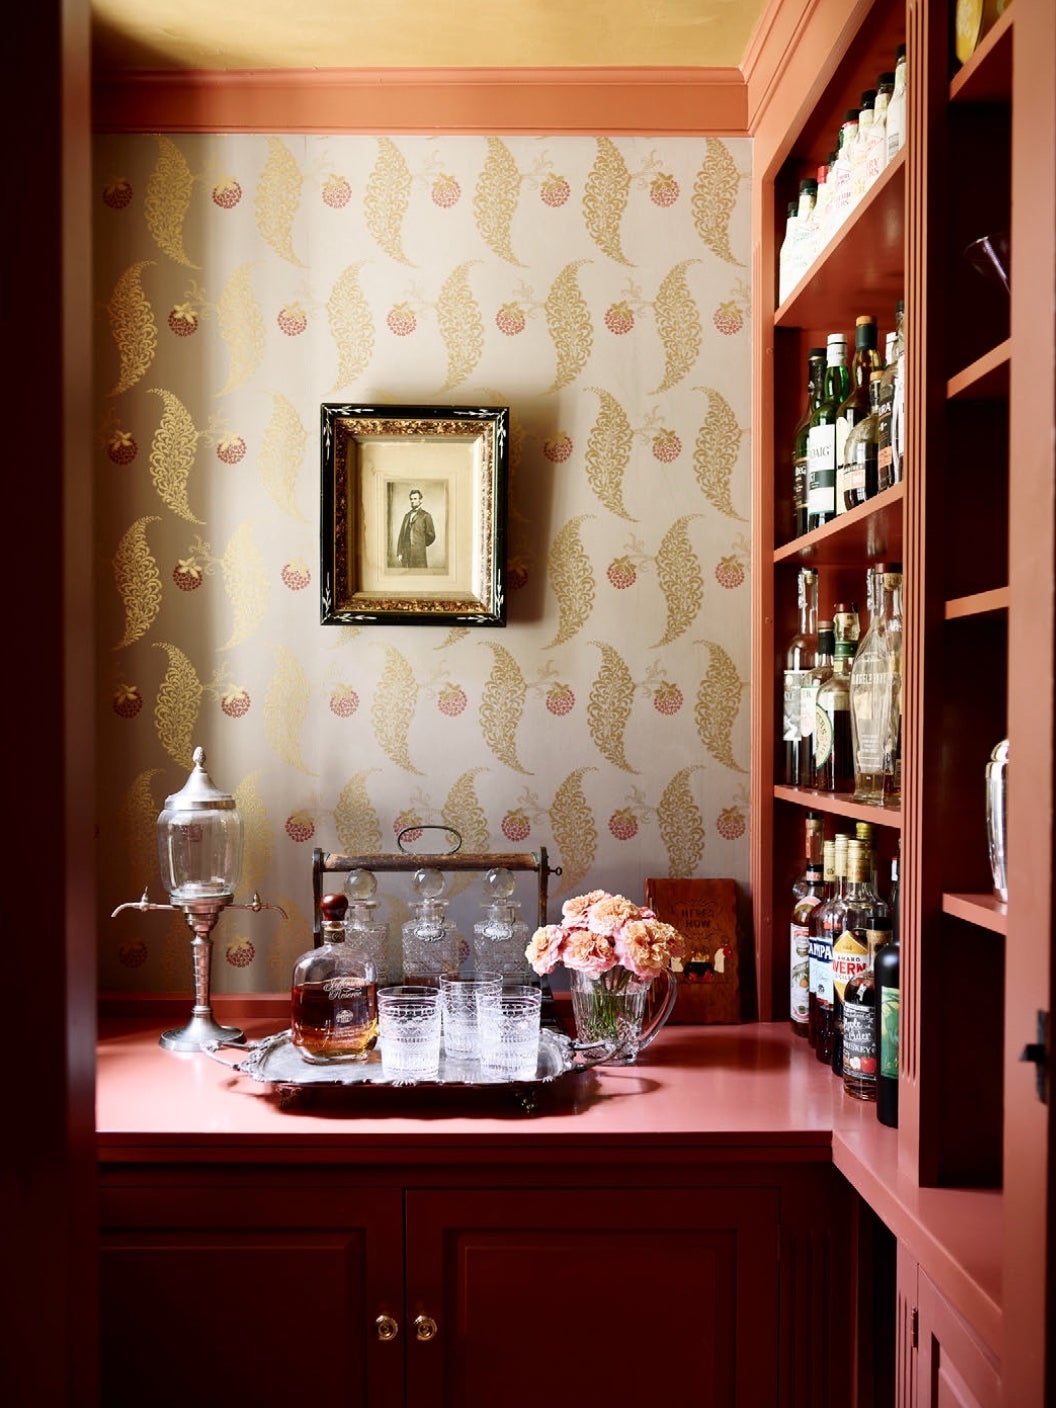 Red bar and cabinetry. The red counter has a silver tray with bar glasses and a round bottle of liquor. There is a short vase of pink flowers. A lantern on a stand is to the left. The wallpaper is gold leaves and red berries. The side shelves are full of liquor bottles.